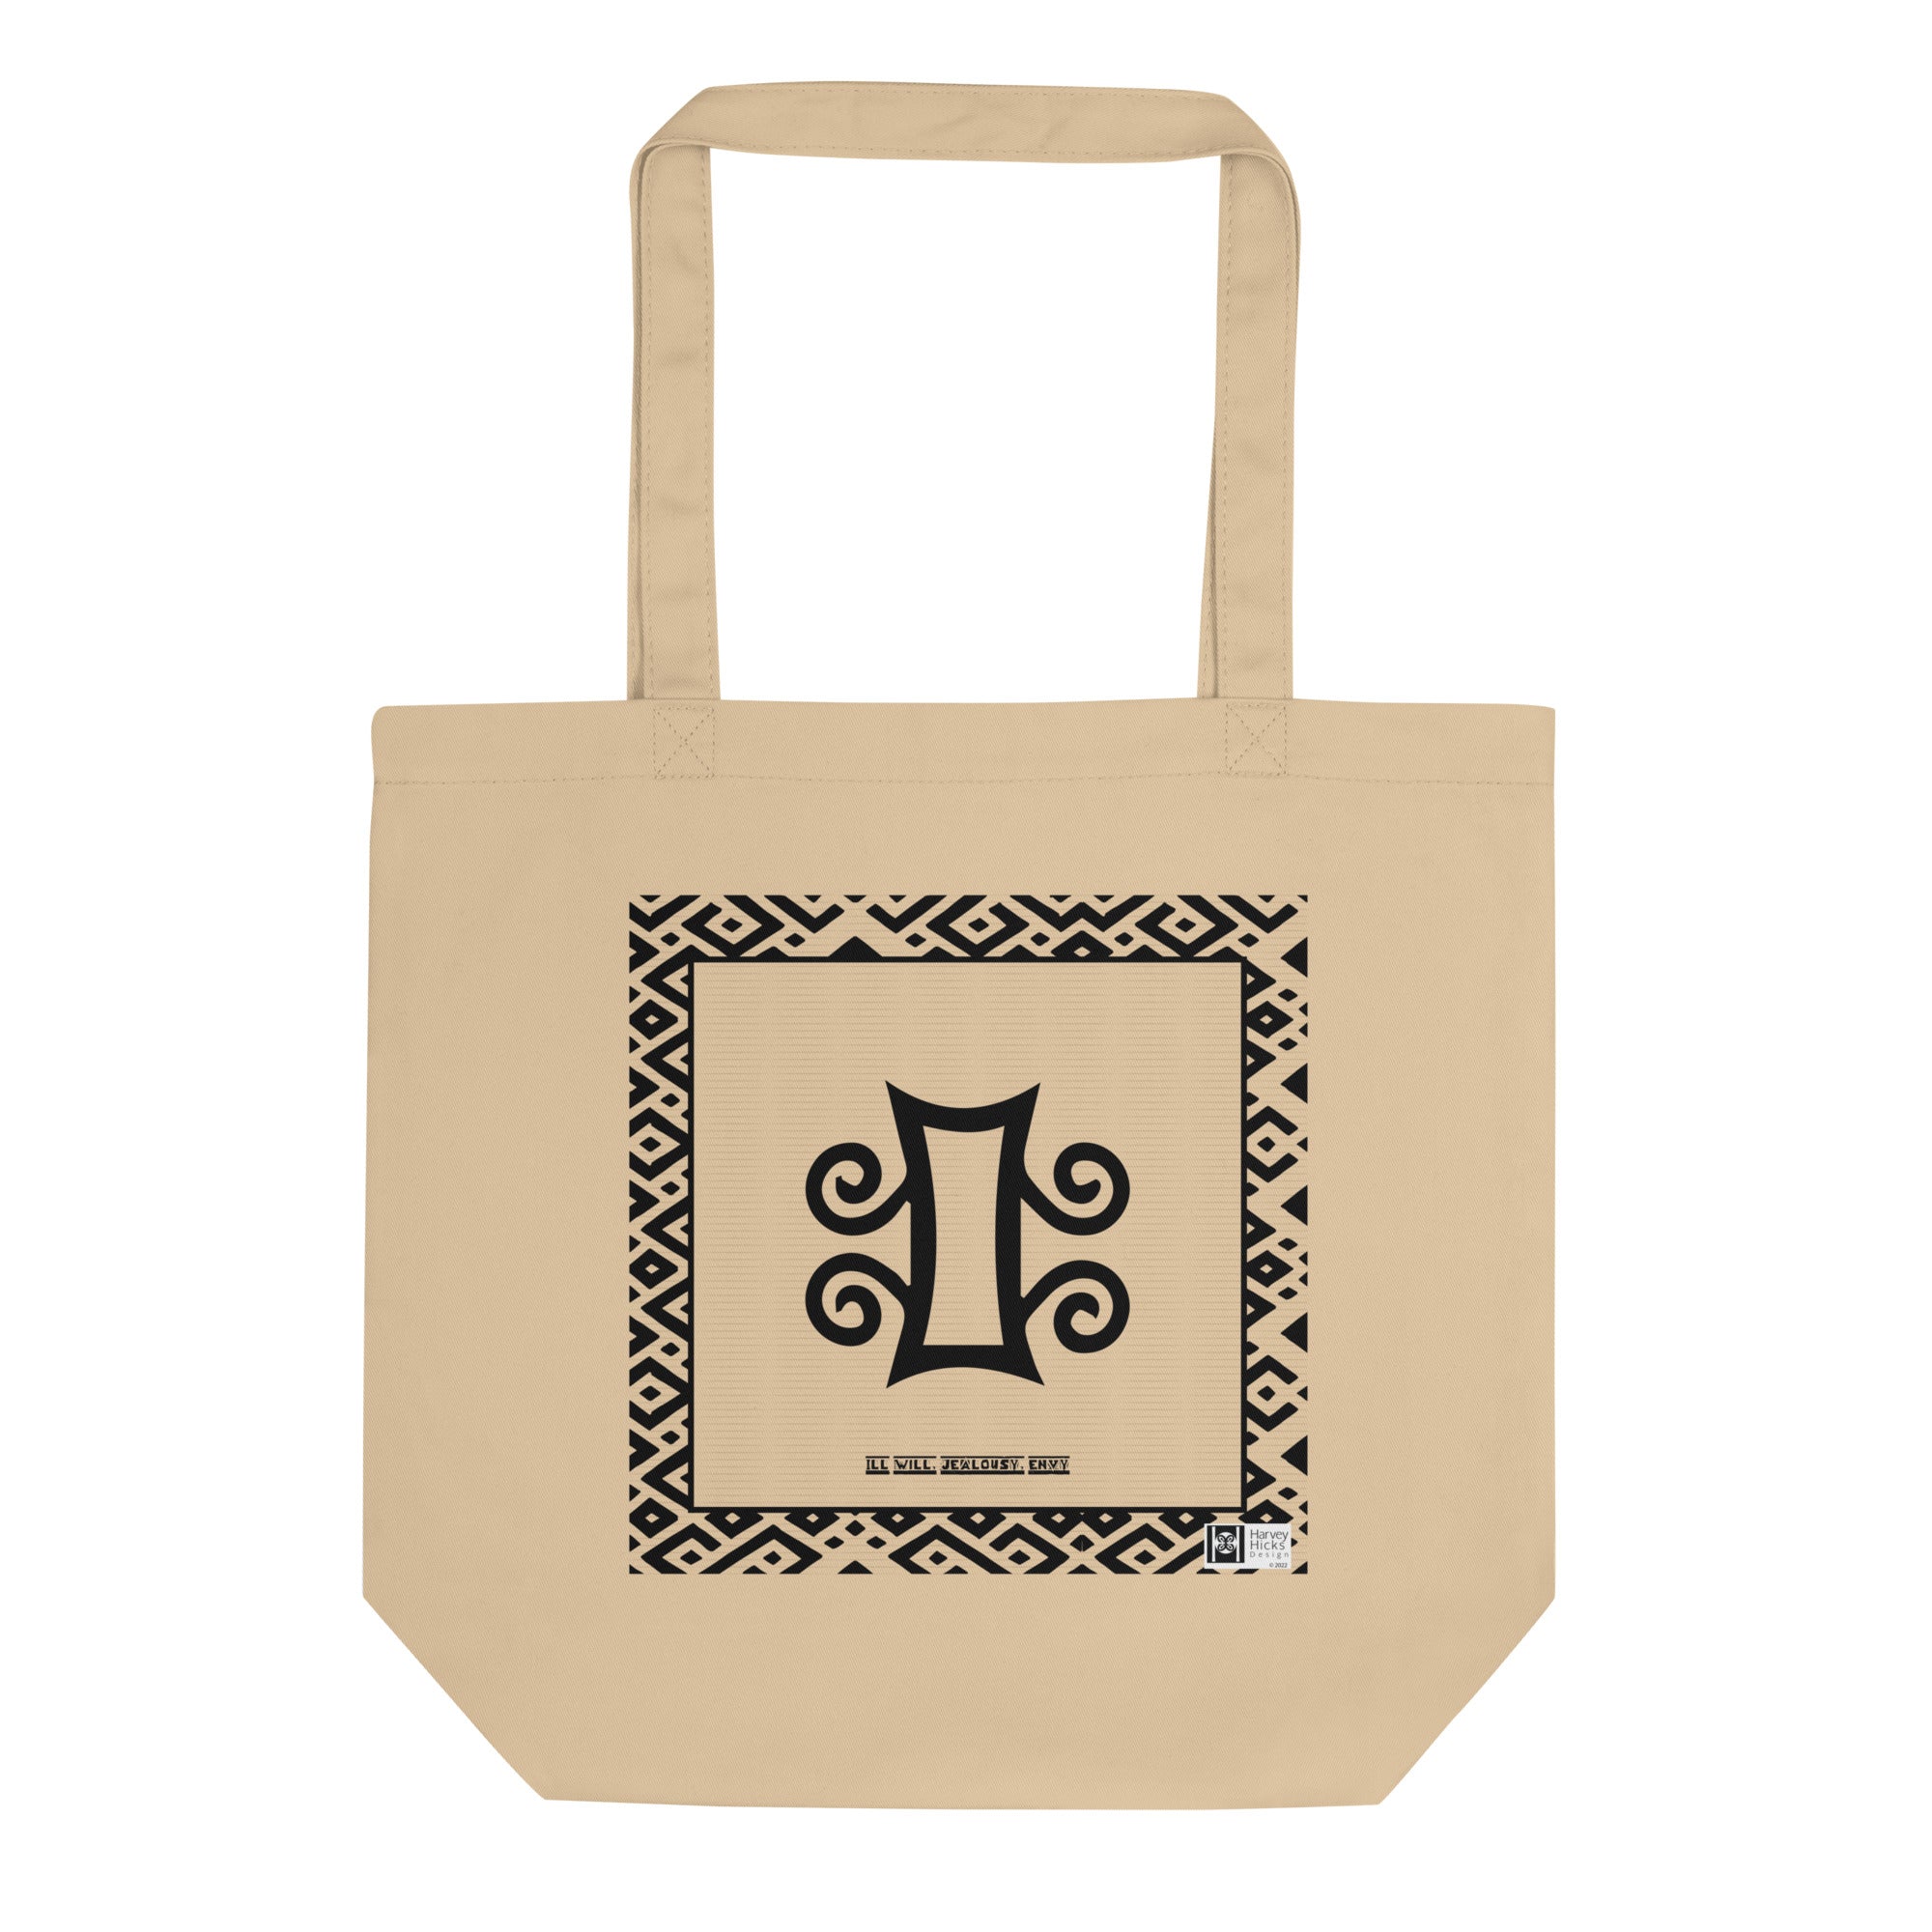 100% cotton Eco Tote Bag, featuring the Adinkra symbol for ill will